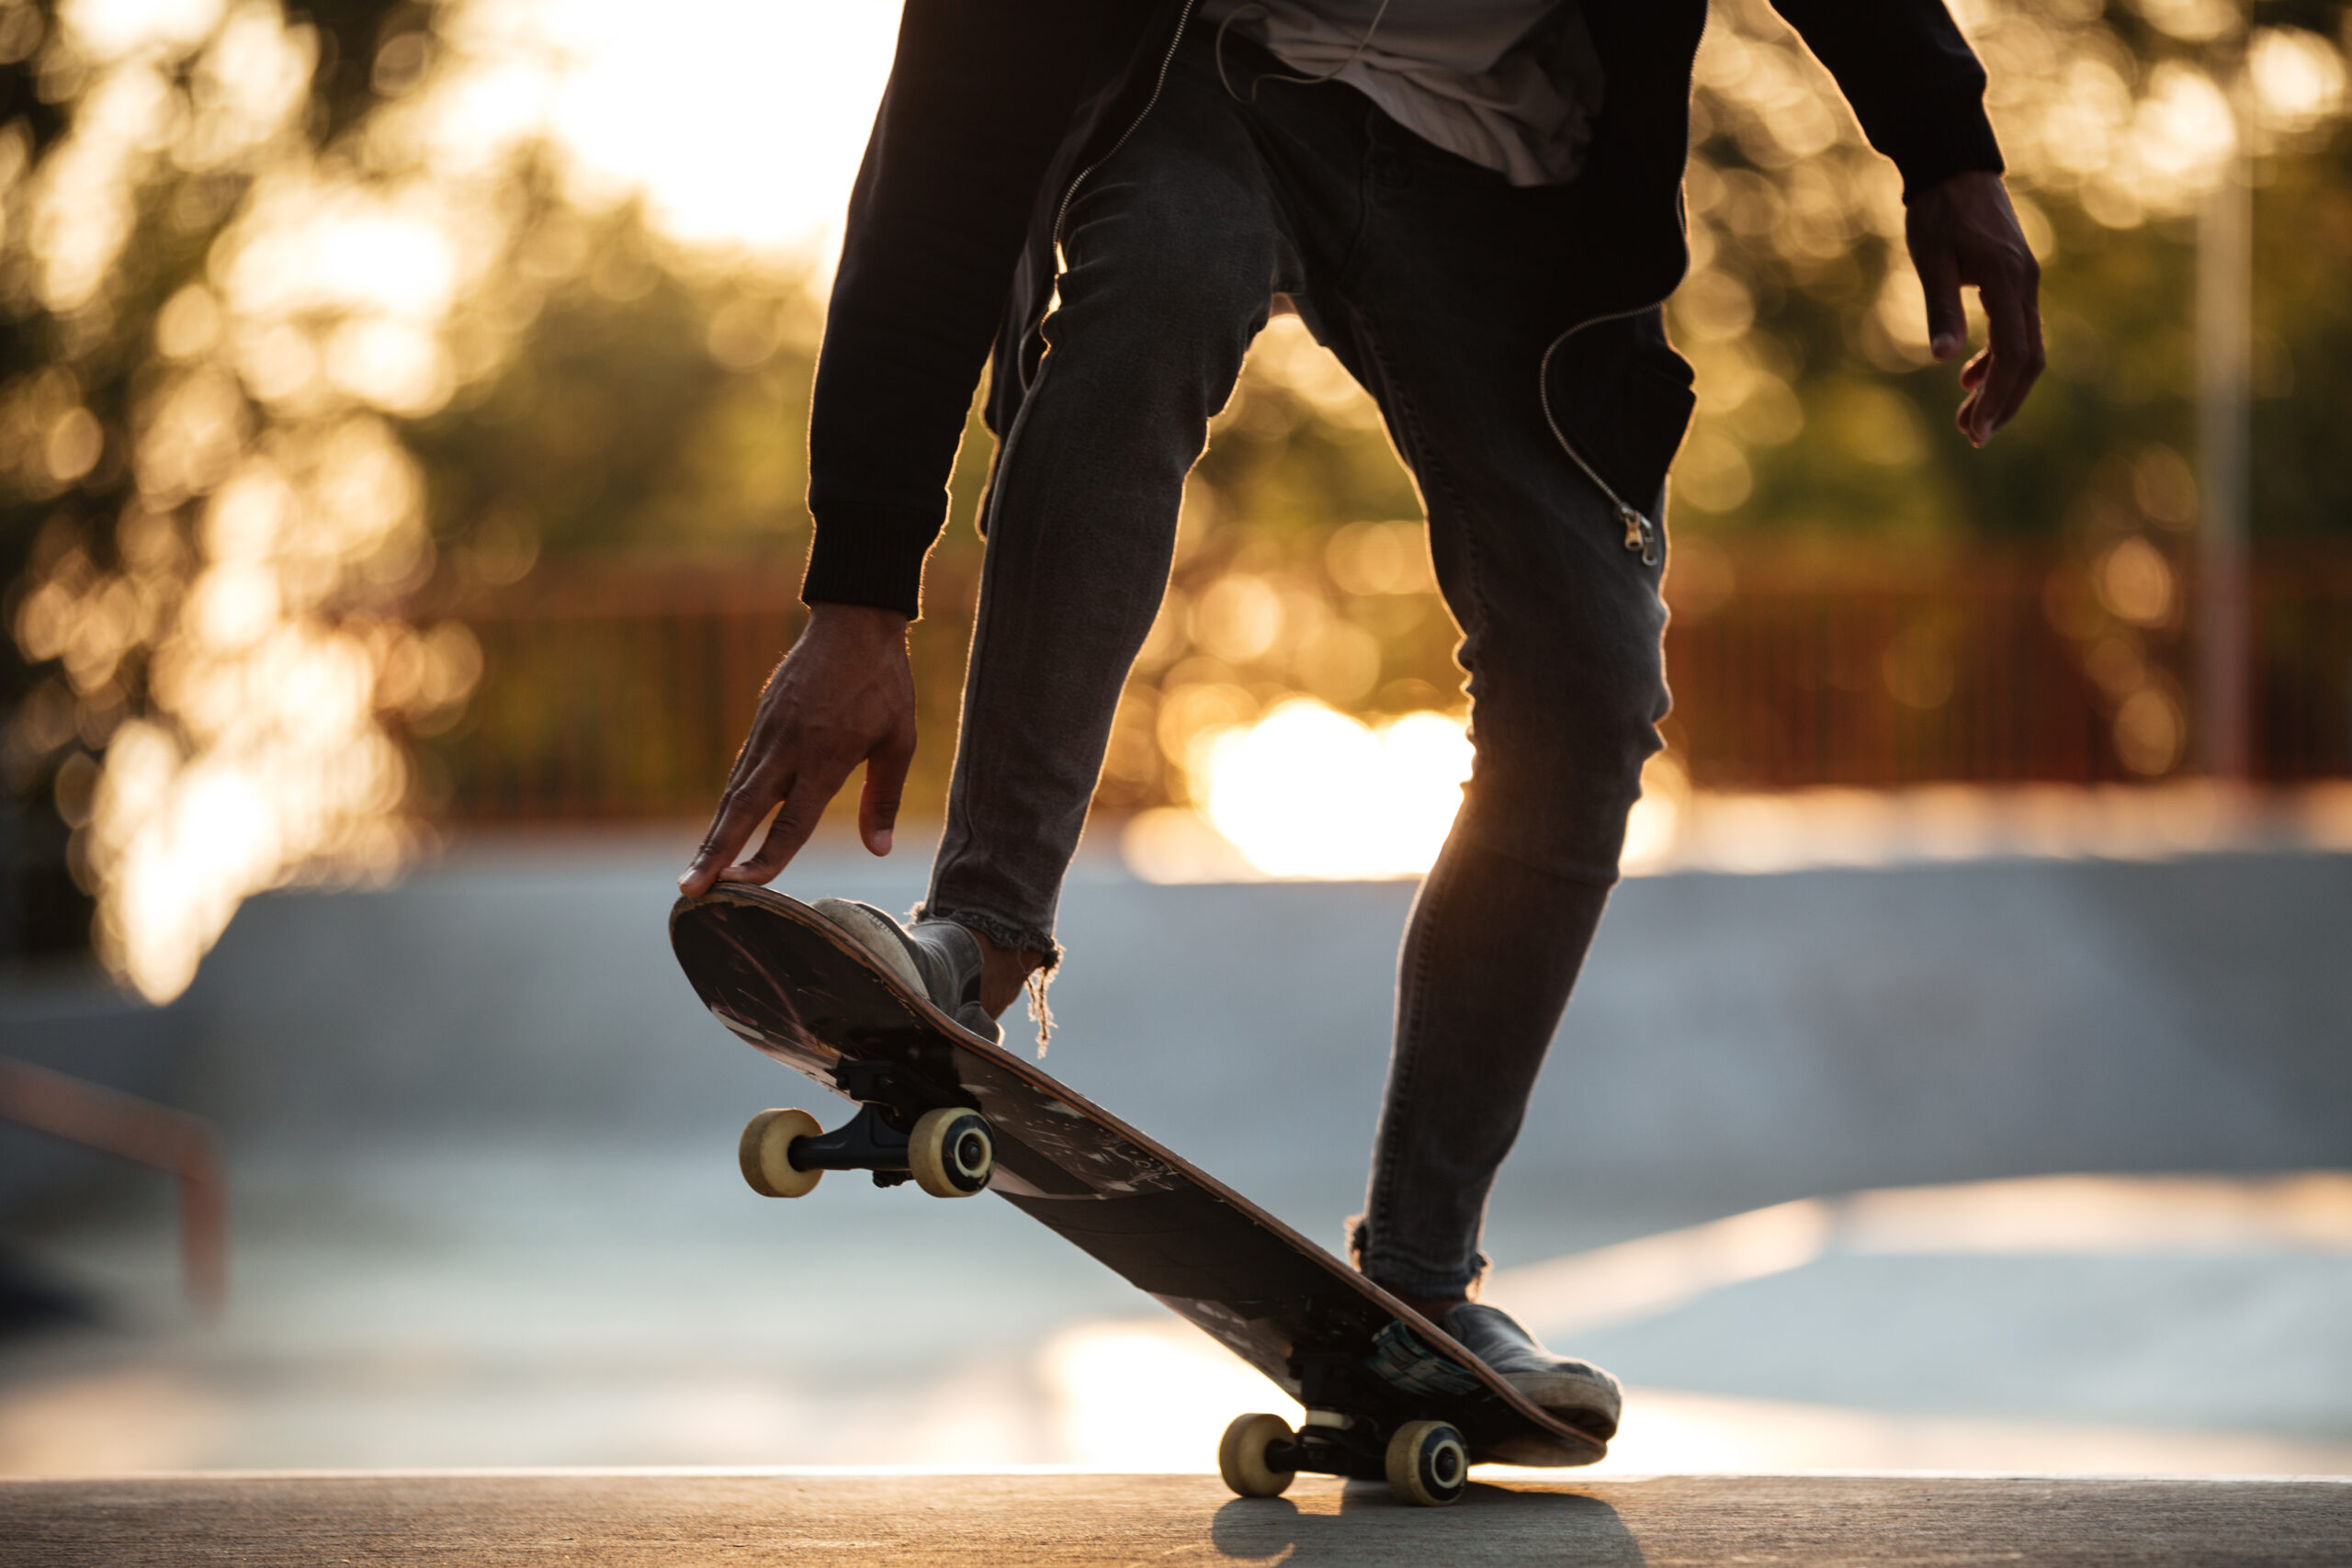 Onewheel Skateboard Recall Launched After 4 Deaths